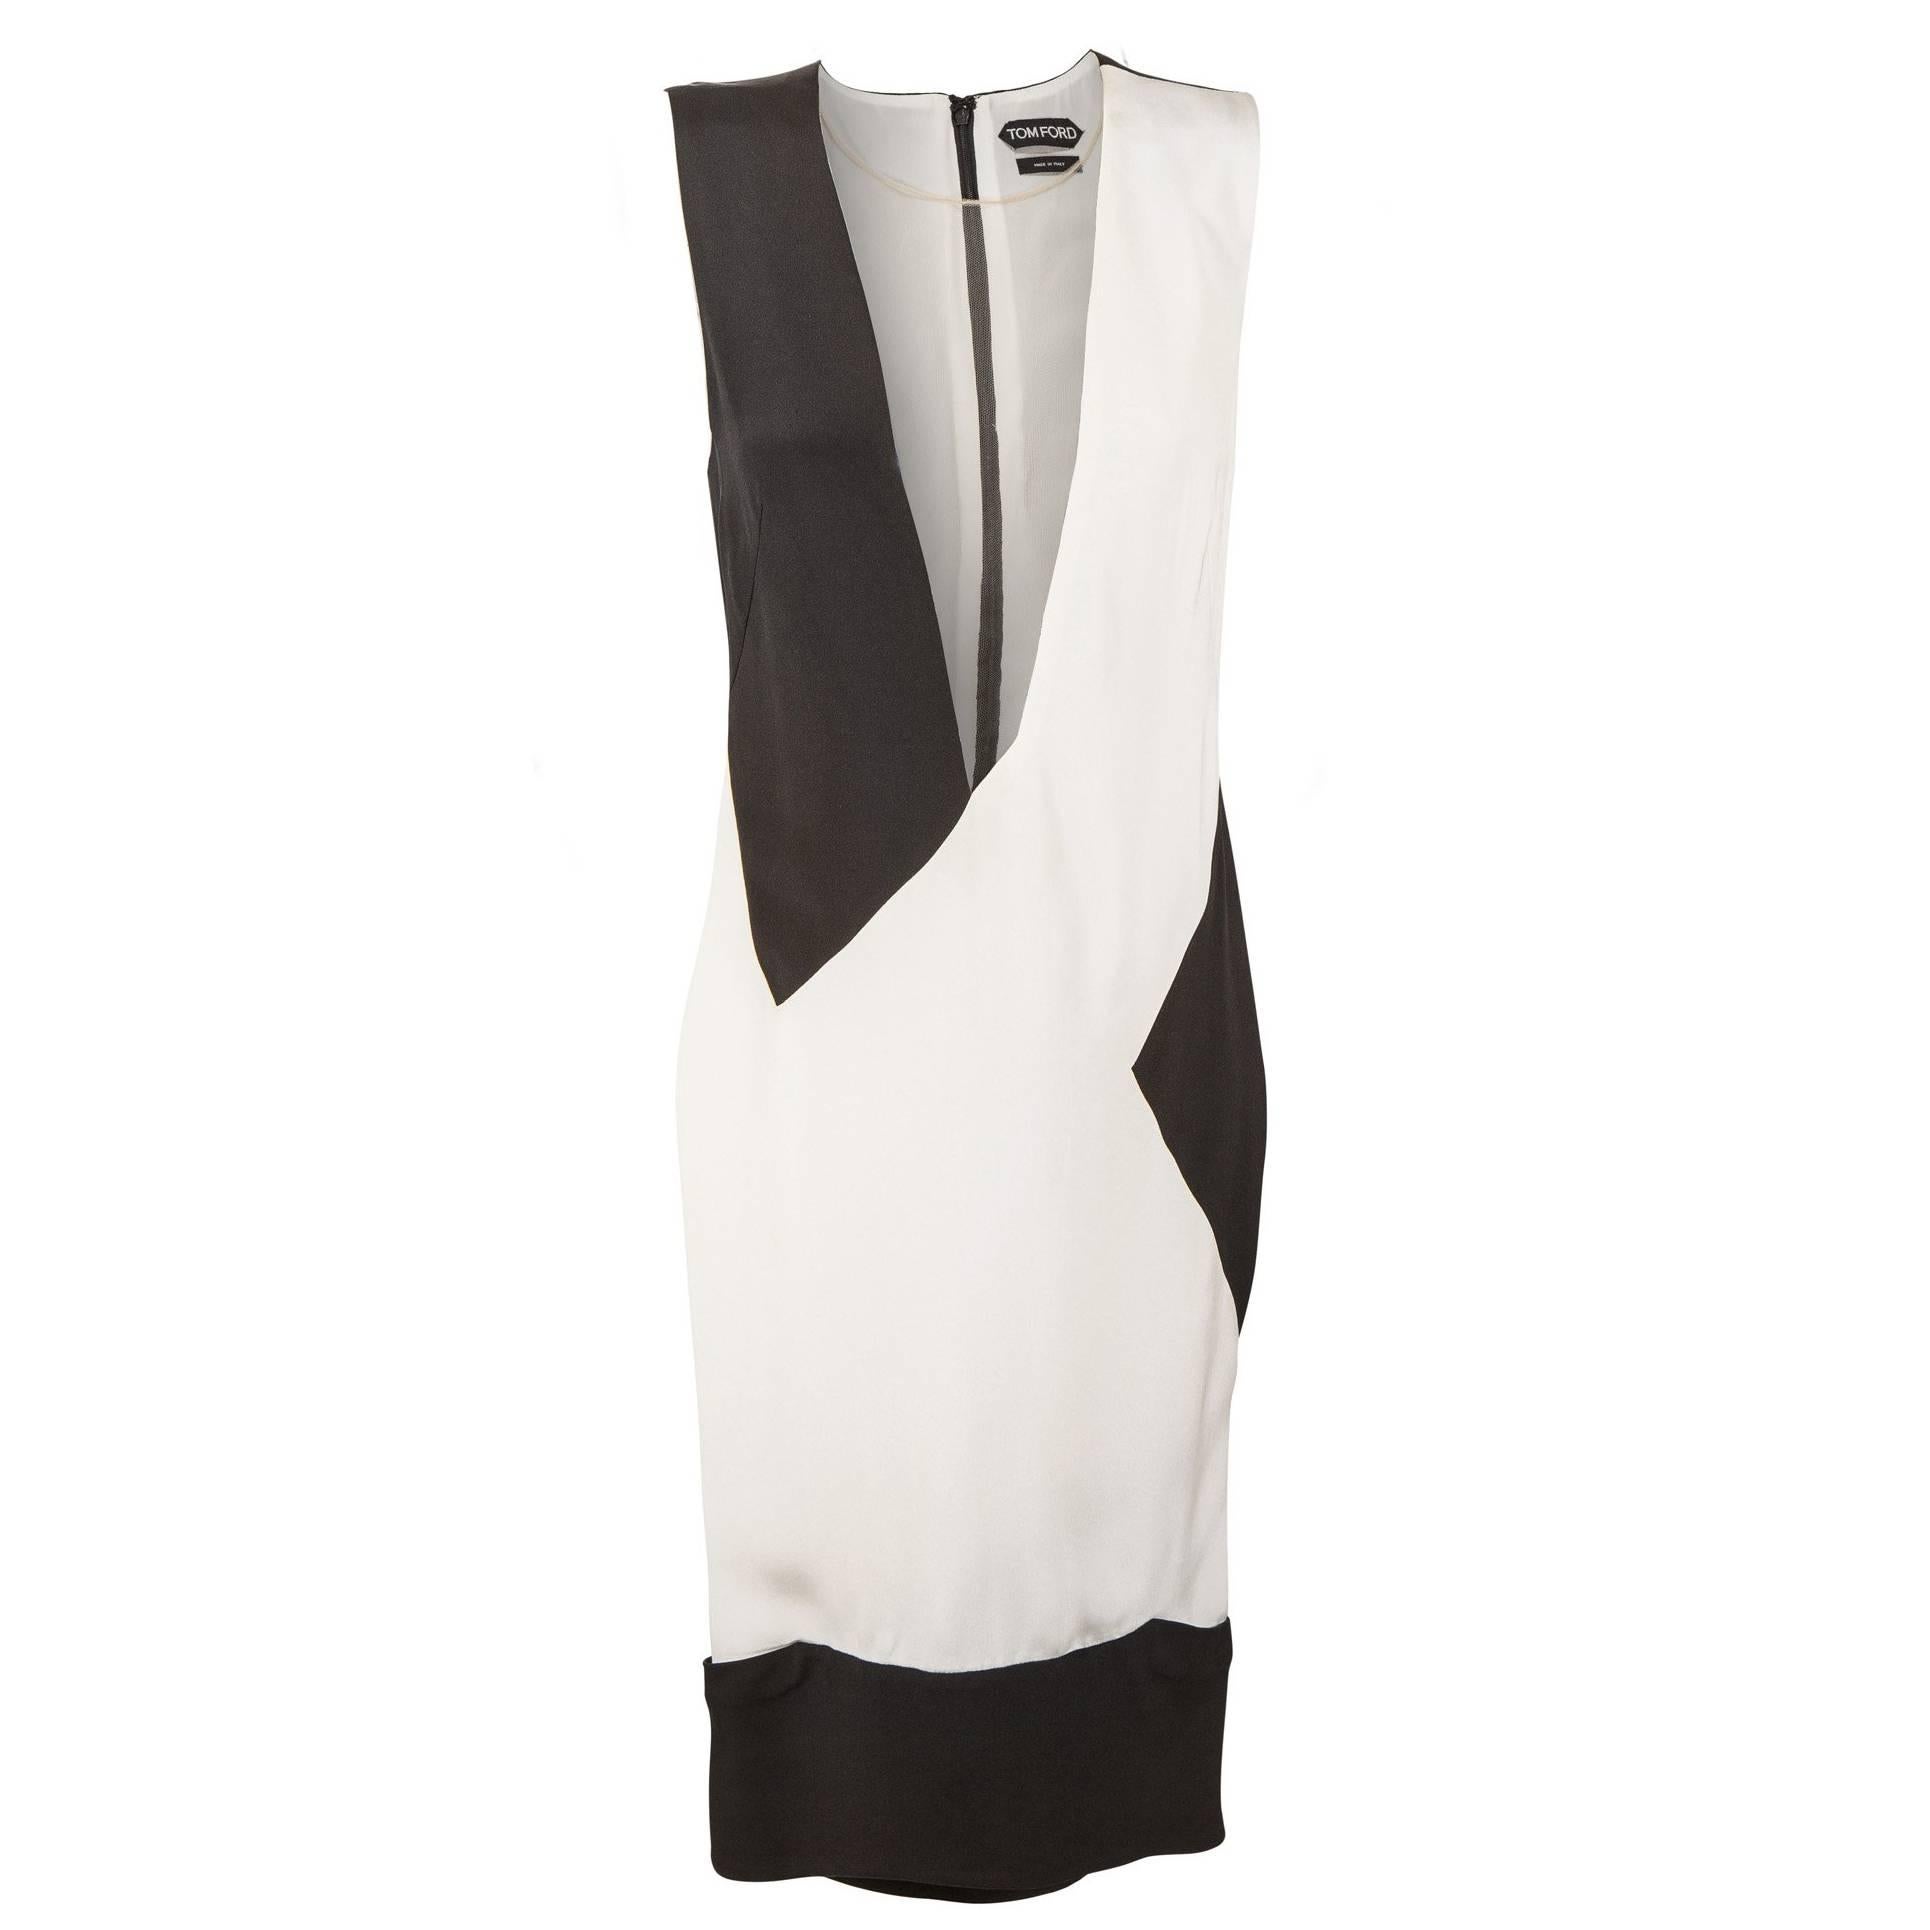 Tom Ford Spring 2013 Black and White Evening Dress with Sheer panel For Sale